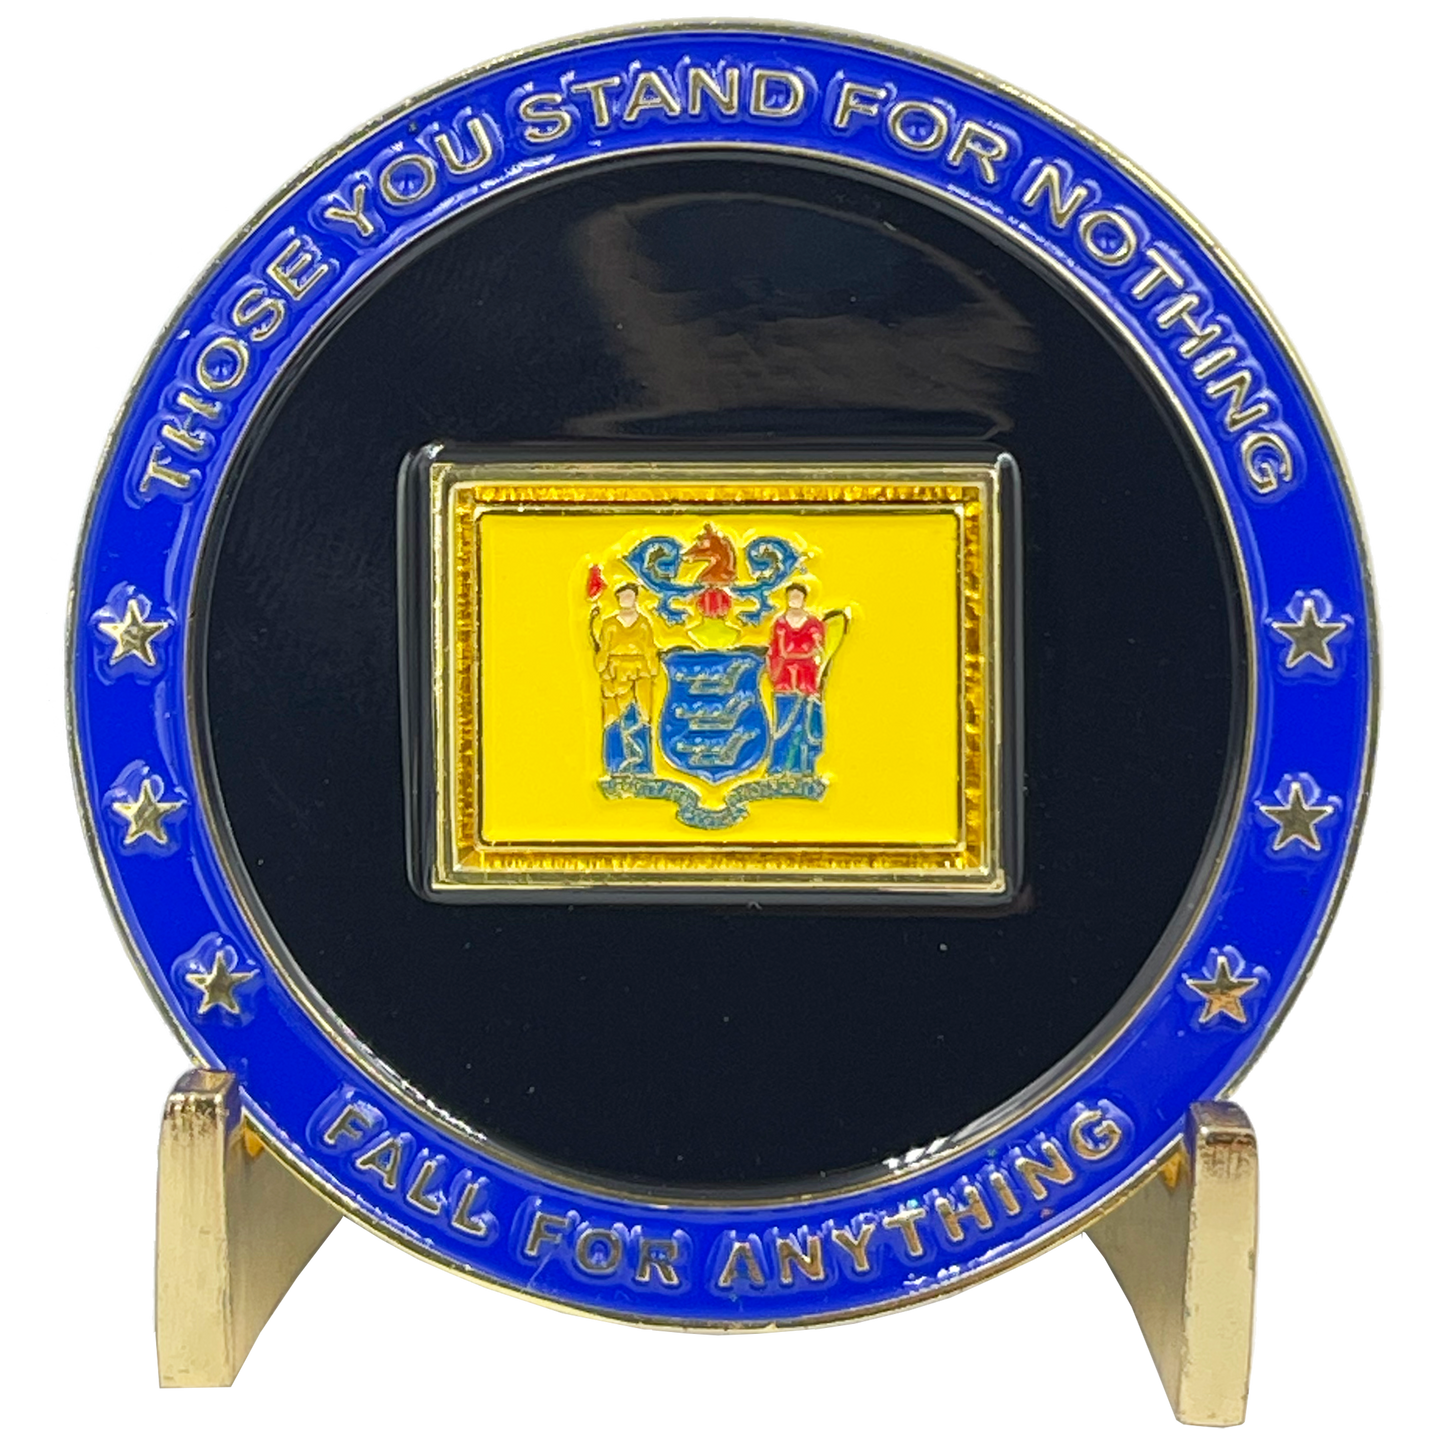 BL3-004 New Jersey NJ BACKS THE BLUE Thin Blue Line Police Challenge Coin with free matching State Flag pin back the blue Sheriff NJSP Newark trooper